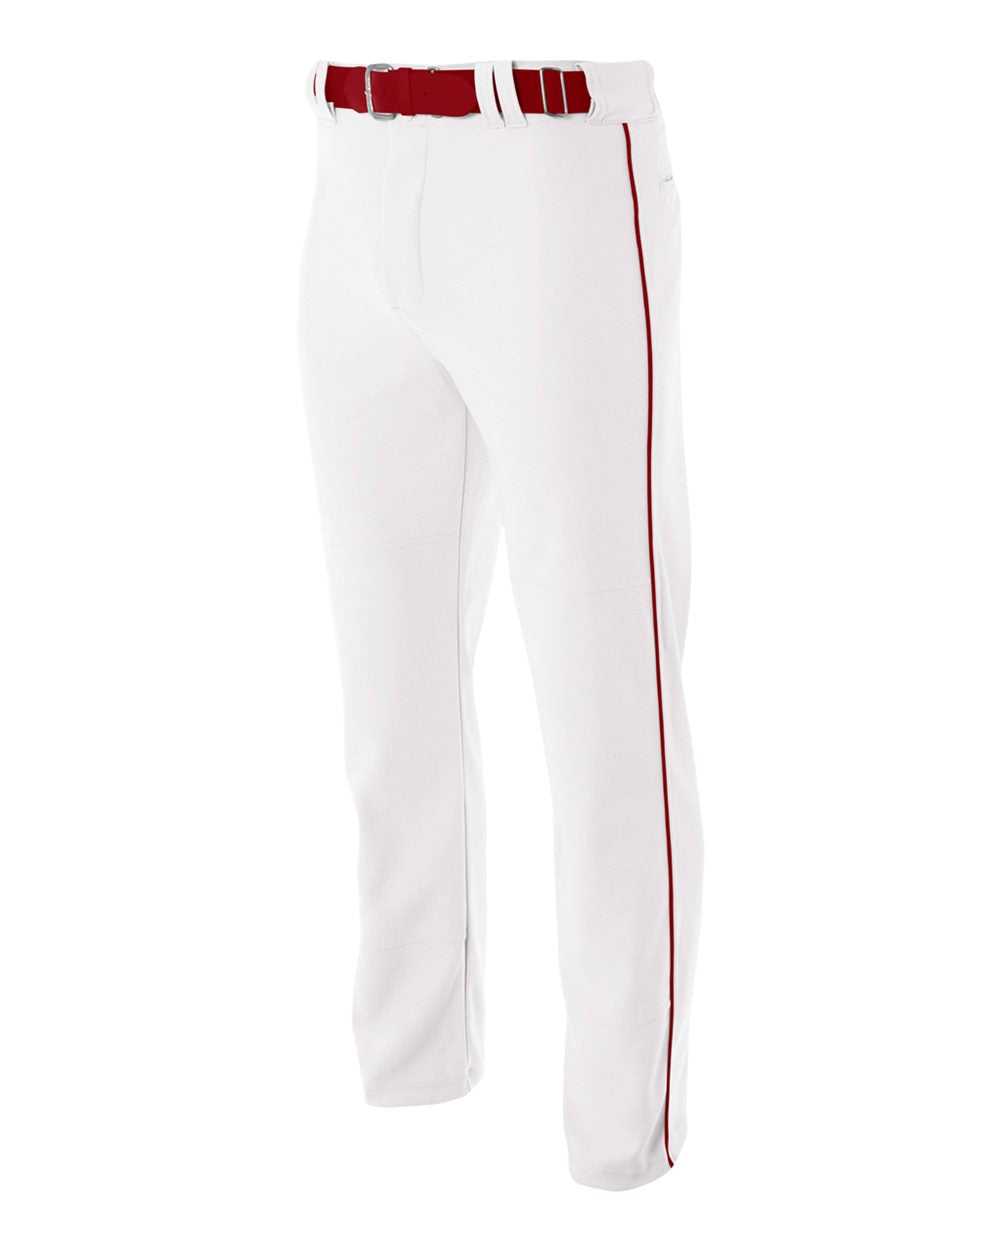 A4 NB6162 Youth Pro Style Open Bottom Baggy Cut Baseball Pant - White Cardinal - HIT a Double